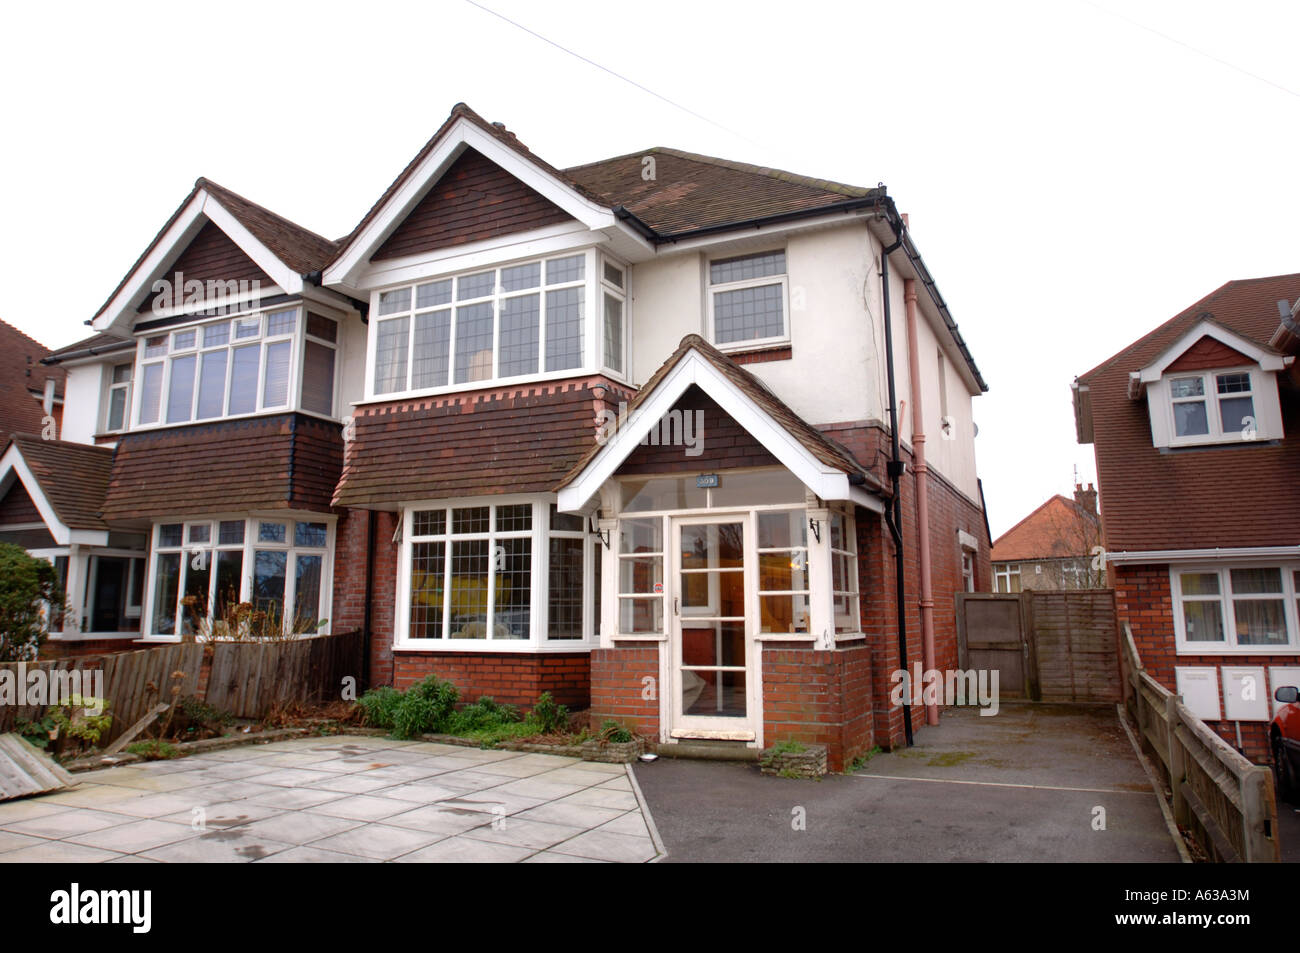 A TYPICAL SEMI DETACHED HOUSE IN A SUBURBAN STREET UK Stock Photo